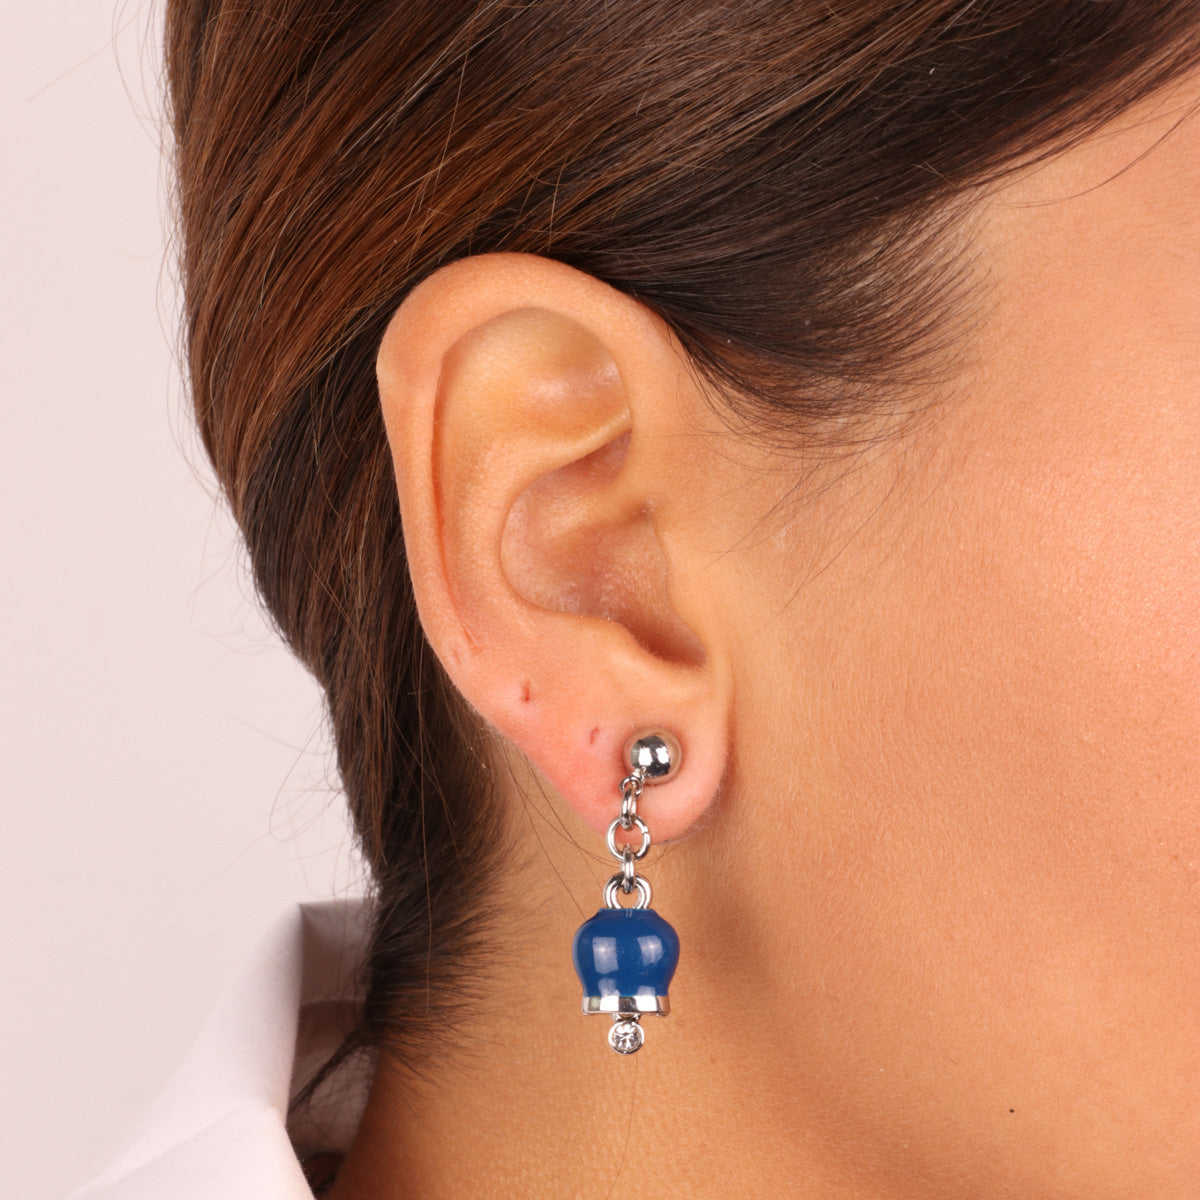 Metal earrings with billets charms of blue pendants, embellished with light point